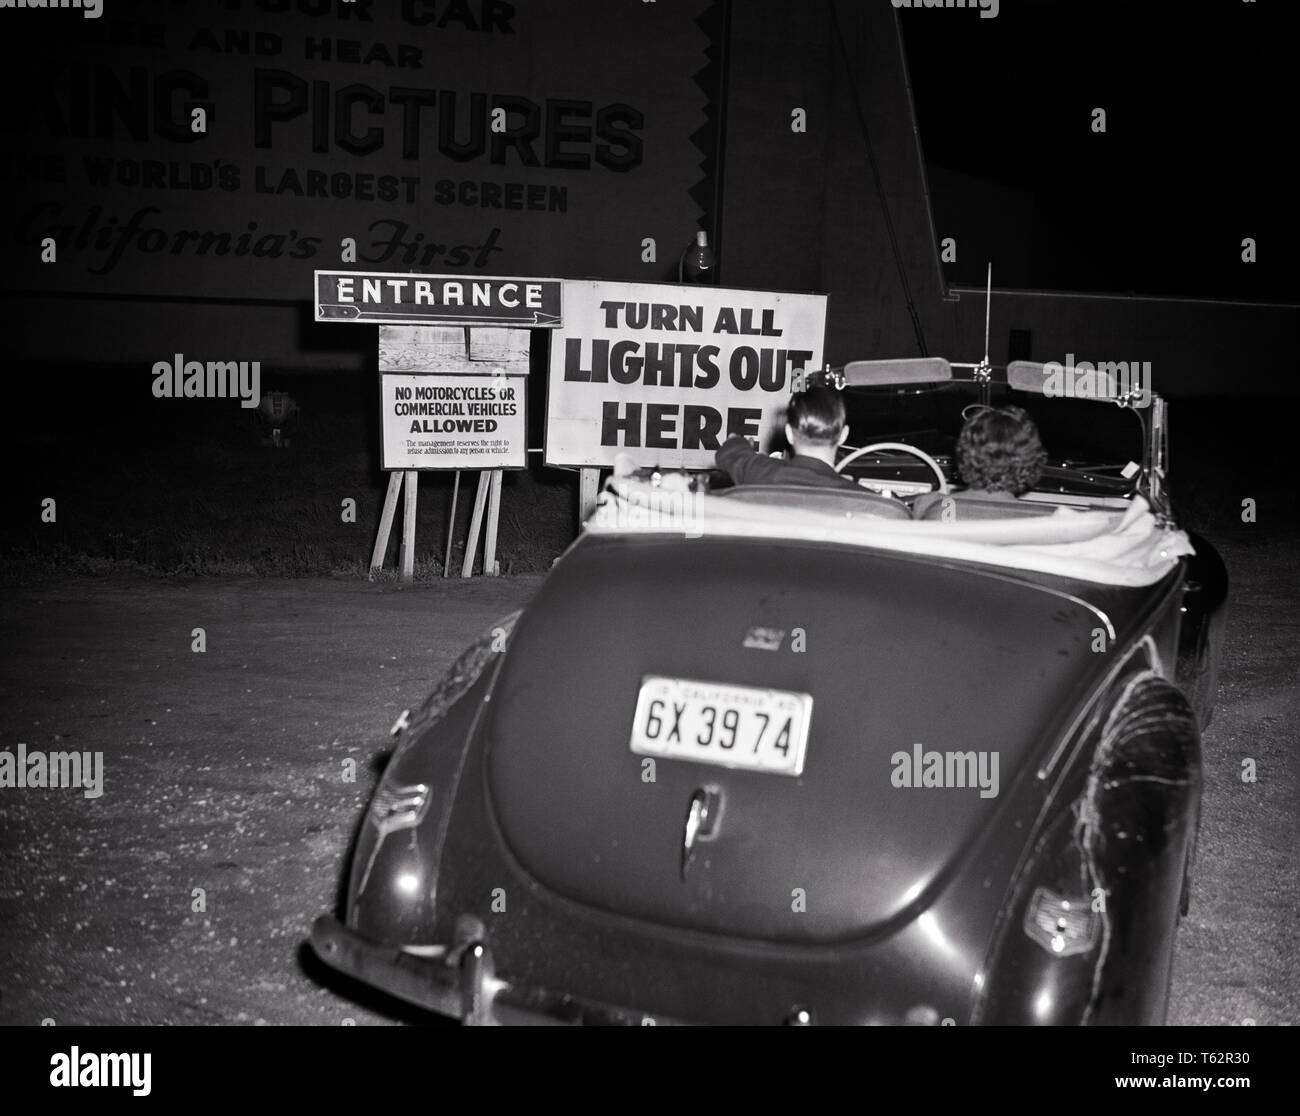 1940s COUPLE MAN WOMAN IN CONVERTIBLE CAR PULLING IN TO DRIVE-IN MOVIE THEATER ENTRANCE SIGN - asp ap 8925 ASP001 HARS TEENAGE BOY ENTERTAINMENT B&W MOVIES DATING DREAMS ENTERING IN TO ATTRACTION COURTSHIP ESCAPE DATE NIGHT MOTION PICTURES POSSIBILITY DRIVE IN DRIVE-IN NIGHTTIME REARVIEW SOCIAL ACTIVITY TOGETHERNESS YOUNG ADULT MAN YOUNG ADULT WOMAN 1948 BLACK AND WHITE CAUCASIAN ETHNICITY COURTING OLD FASHIONED Stock Photo